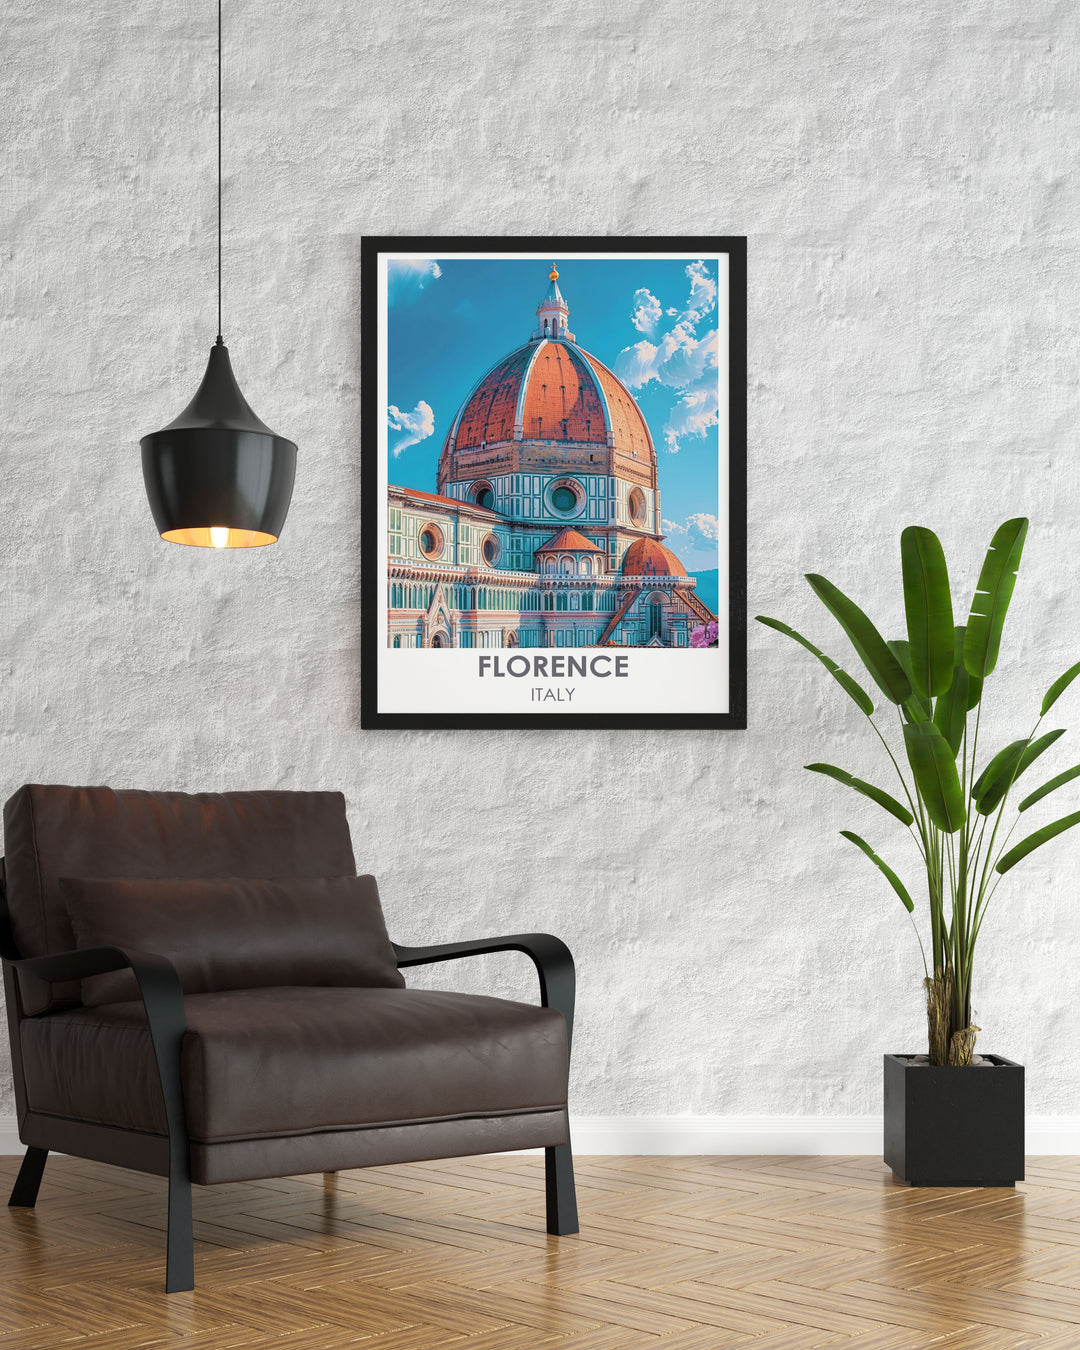 Vintage poster of Florence Cathedral, reflecting the timeless charm and historical importance of this landmark.